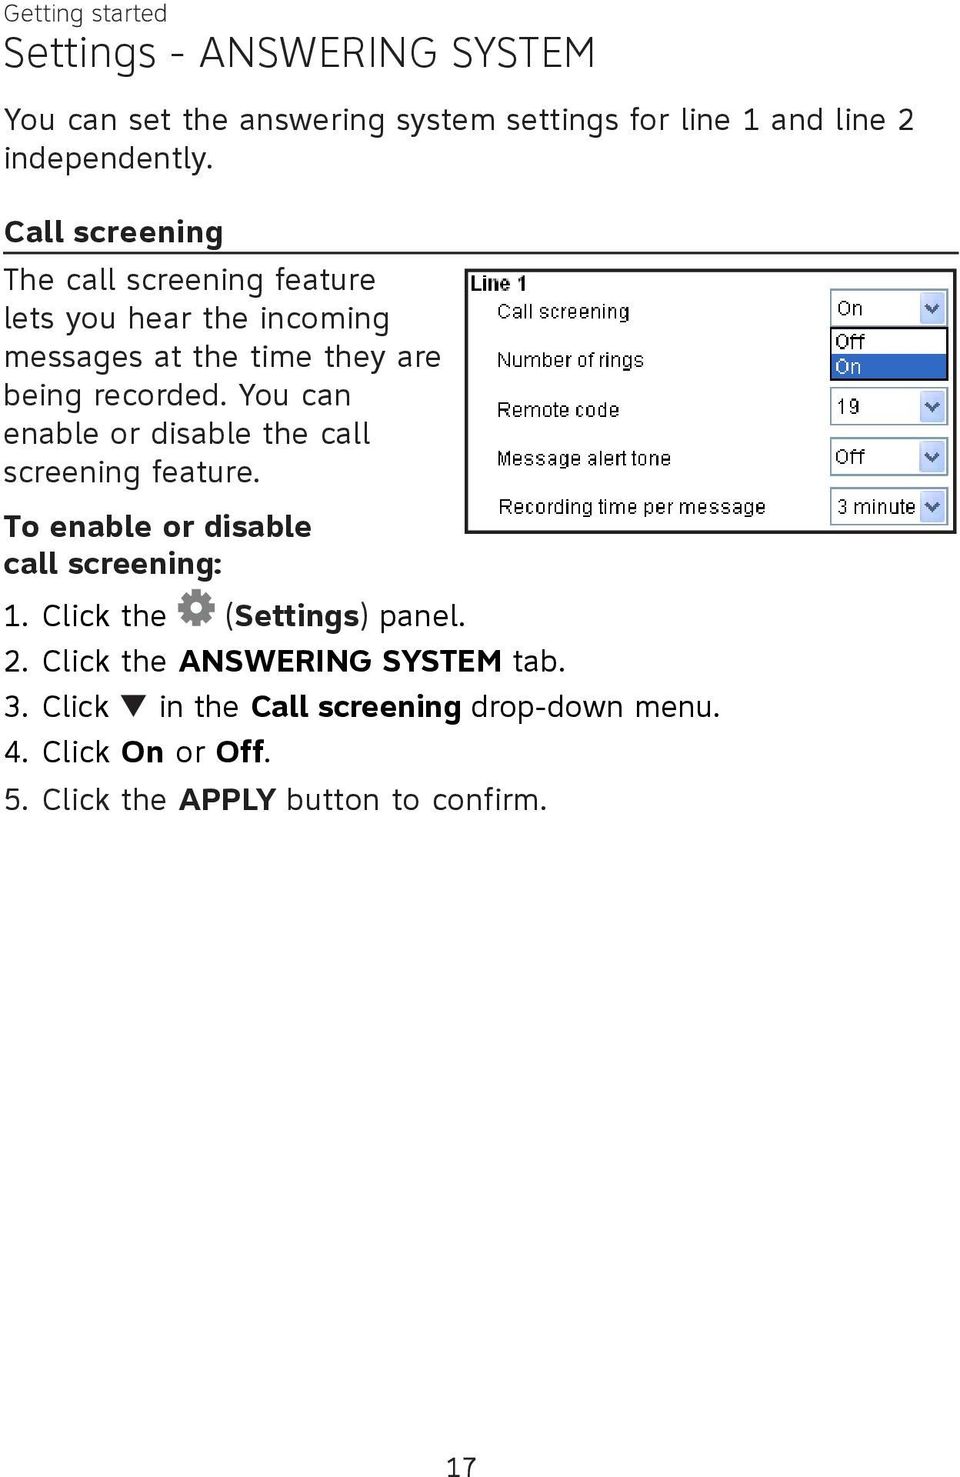 enable or disable the call screening feature. To enable or disable call screening: 1. 2. 3. 4. Click the (Settings) panel.